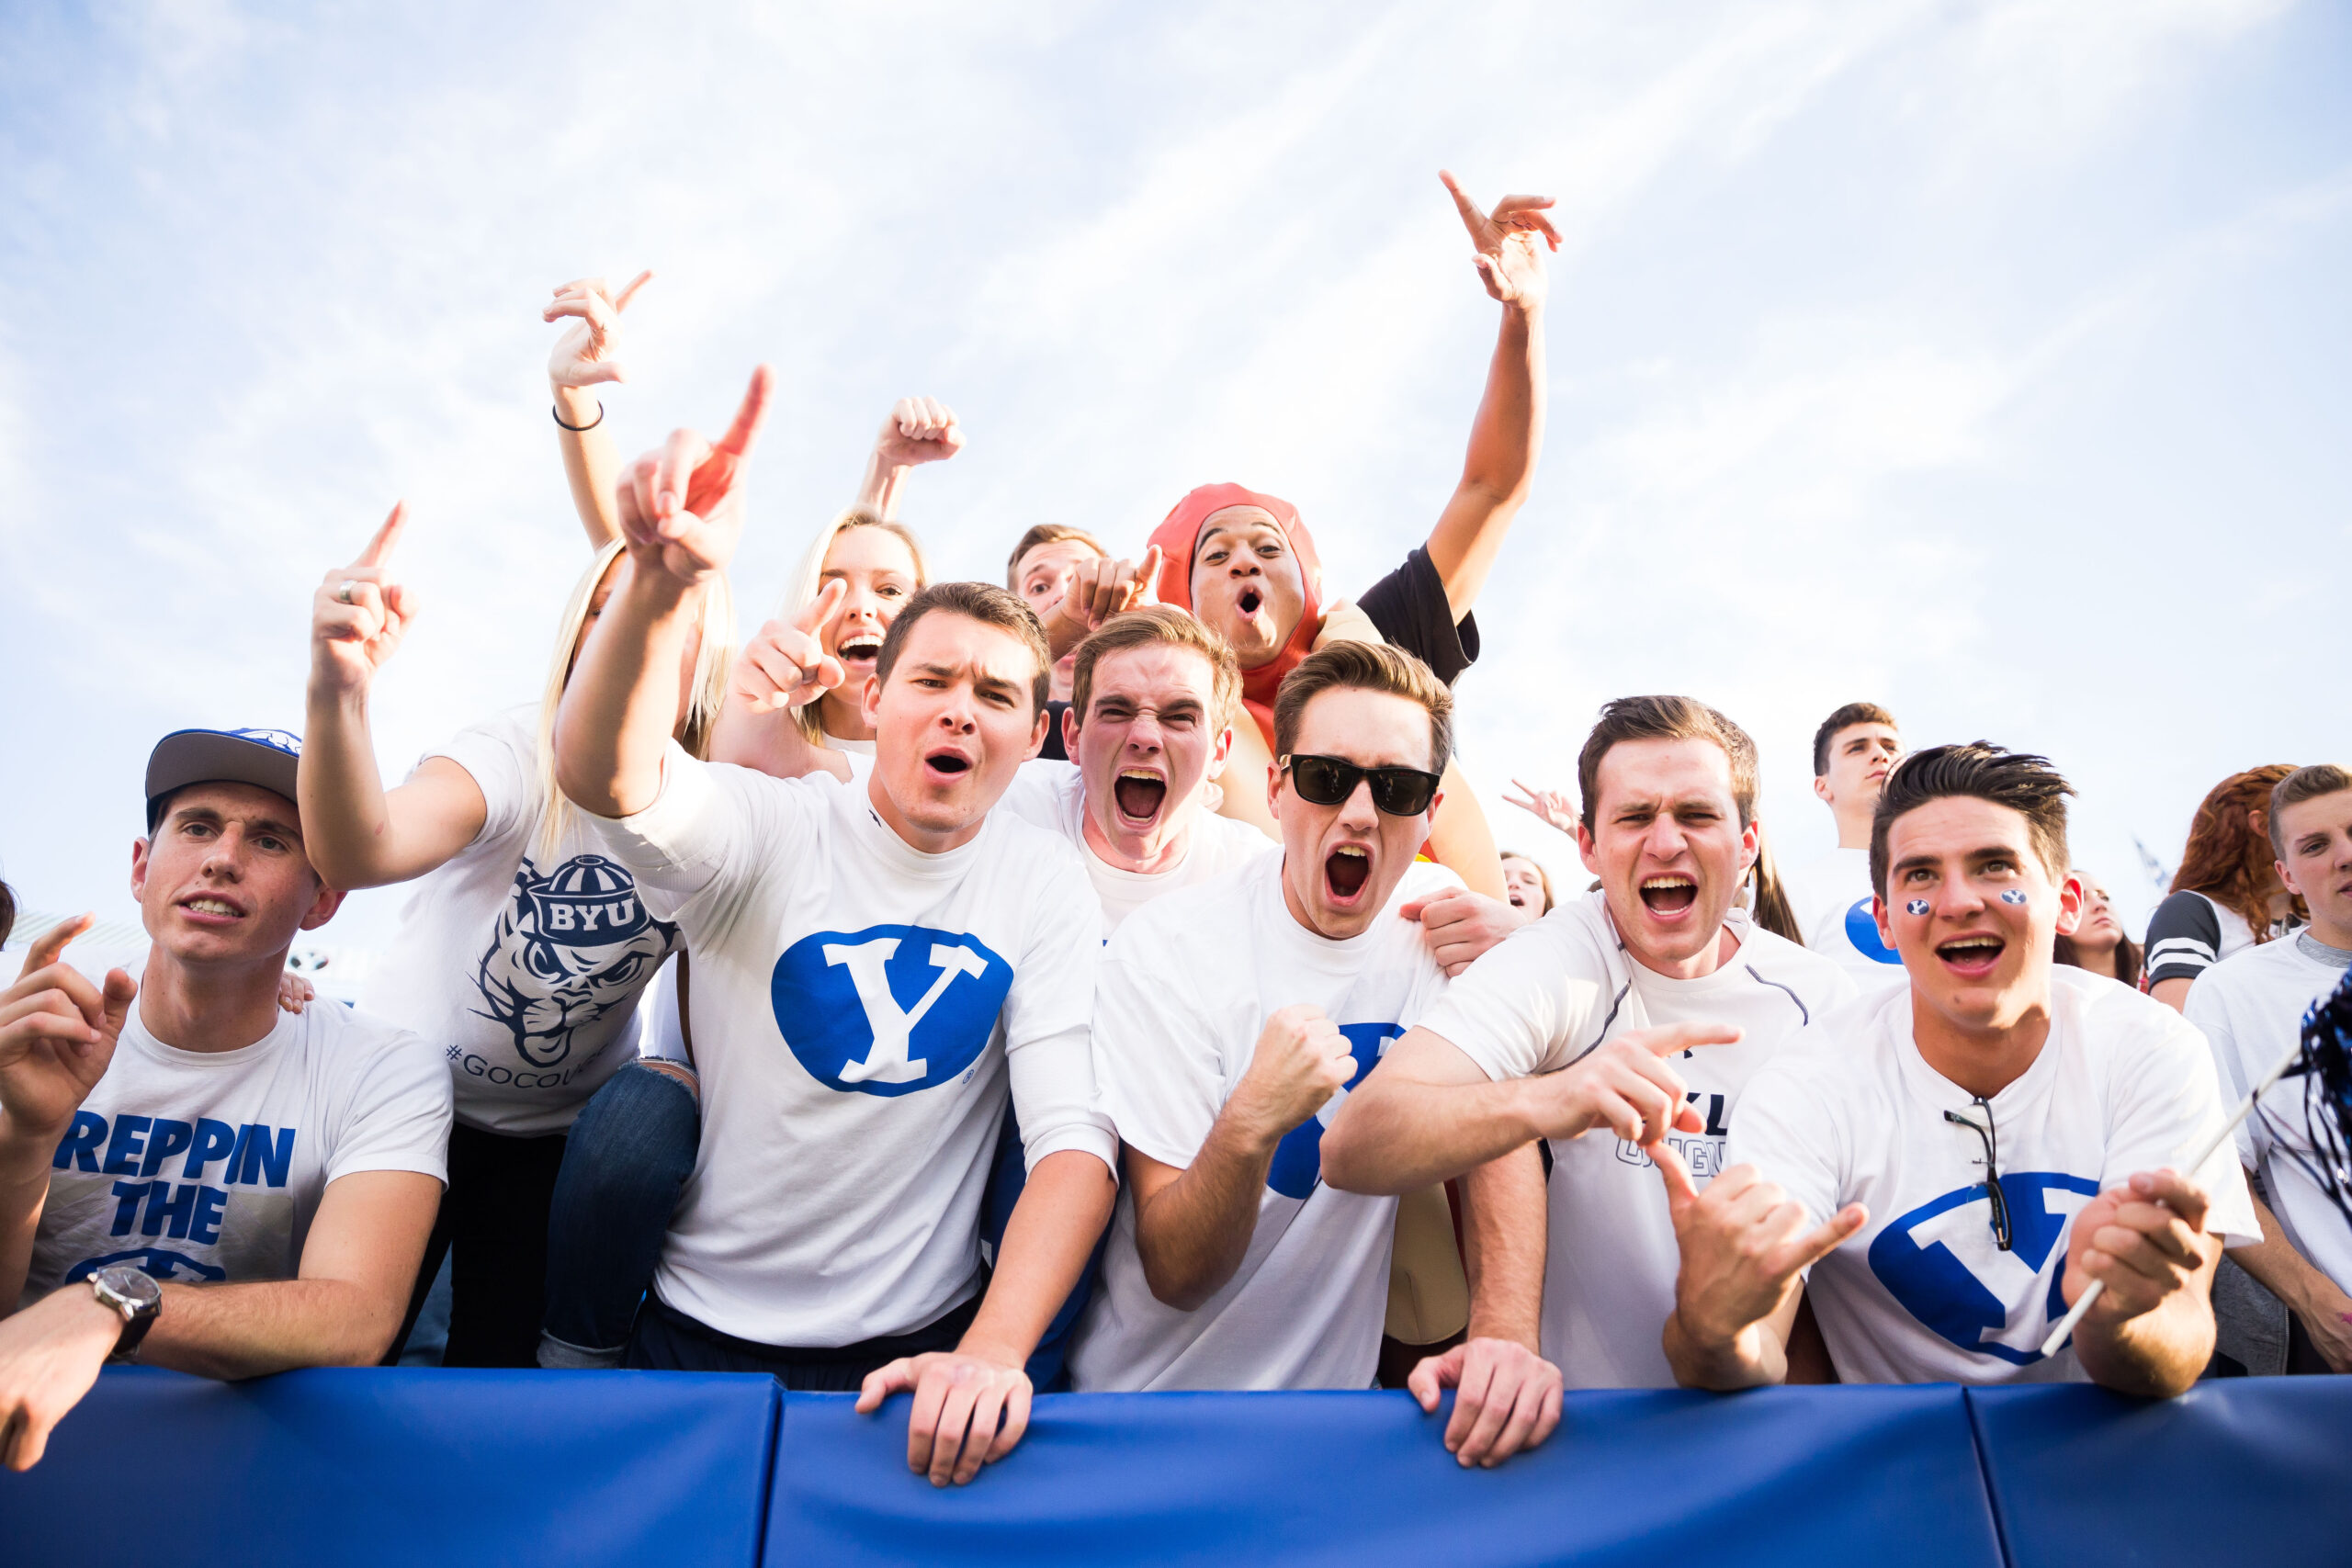 New electronic delivery brings ROC Pass sharing into question for BYU